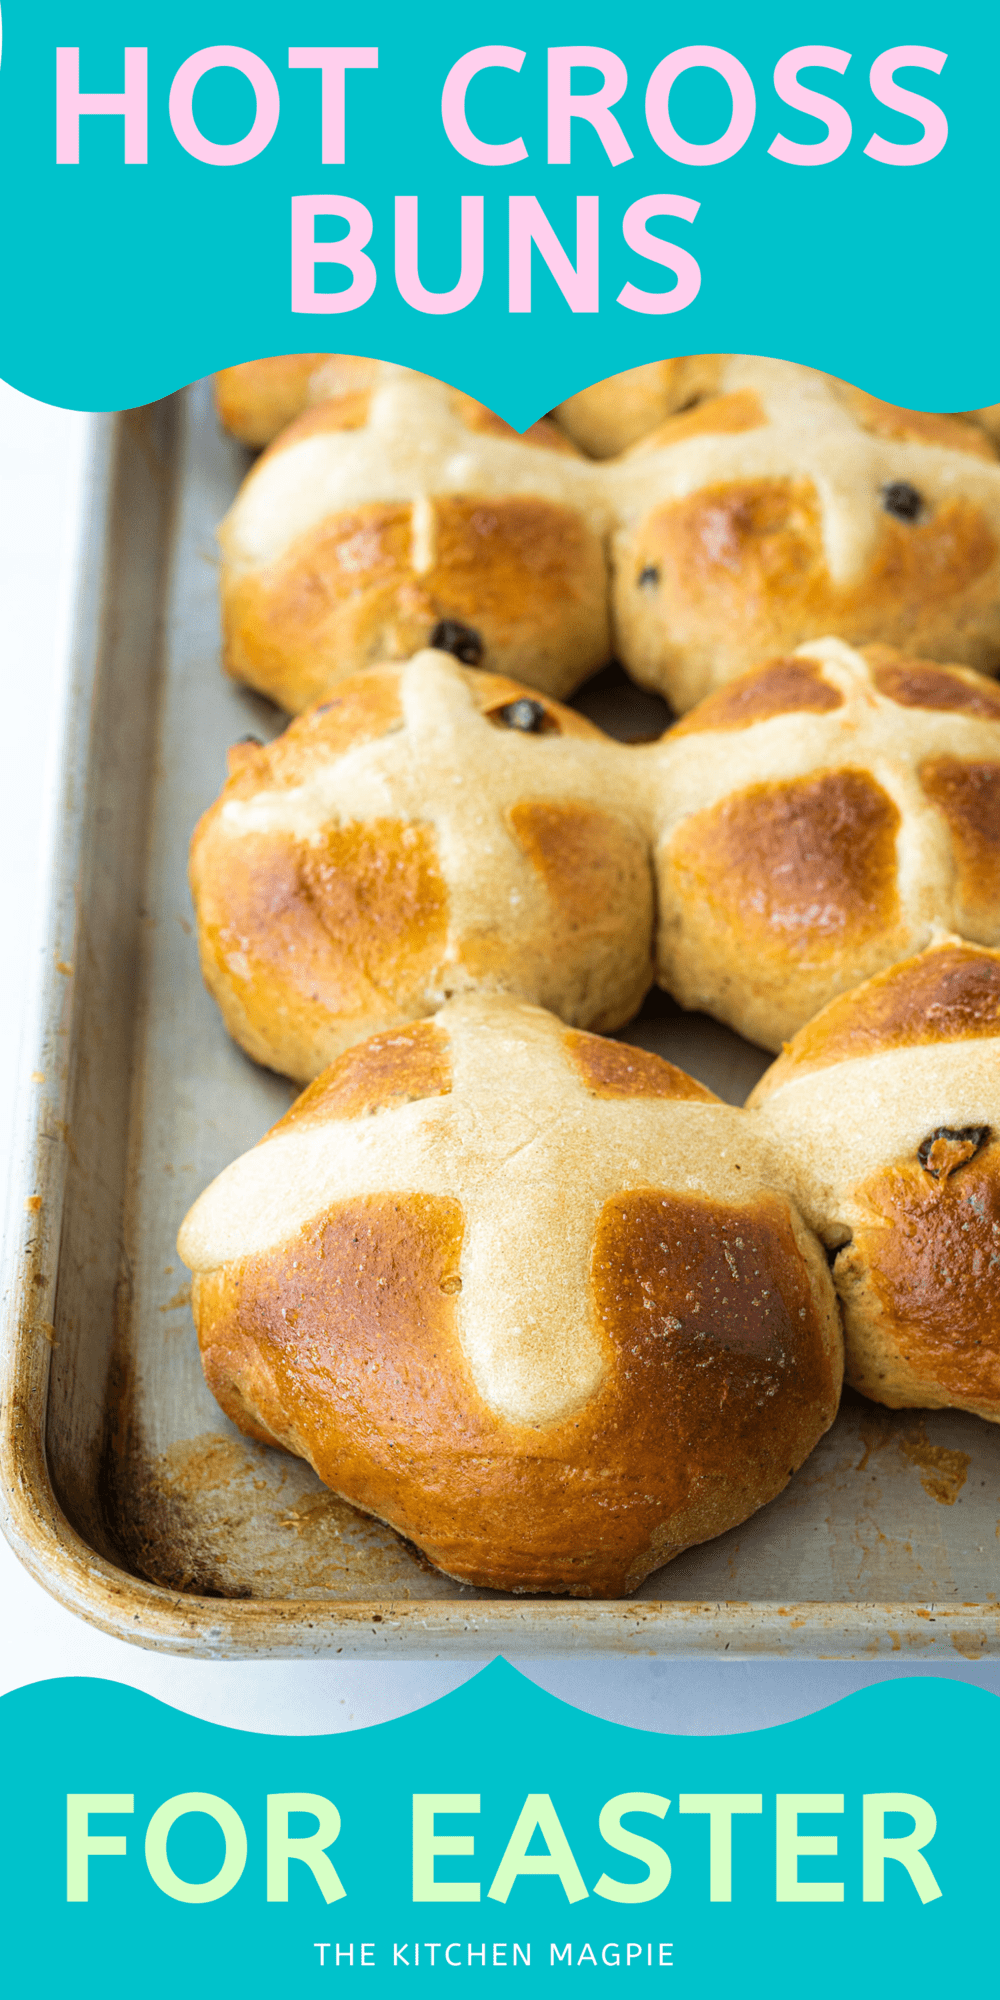 Dense, slightly sweet, spicy, and packed full of currants or raisins, hot cross buns are a much-loved treat of Easter and springtime.